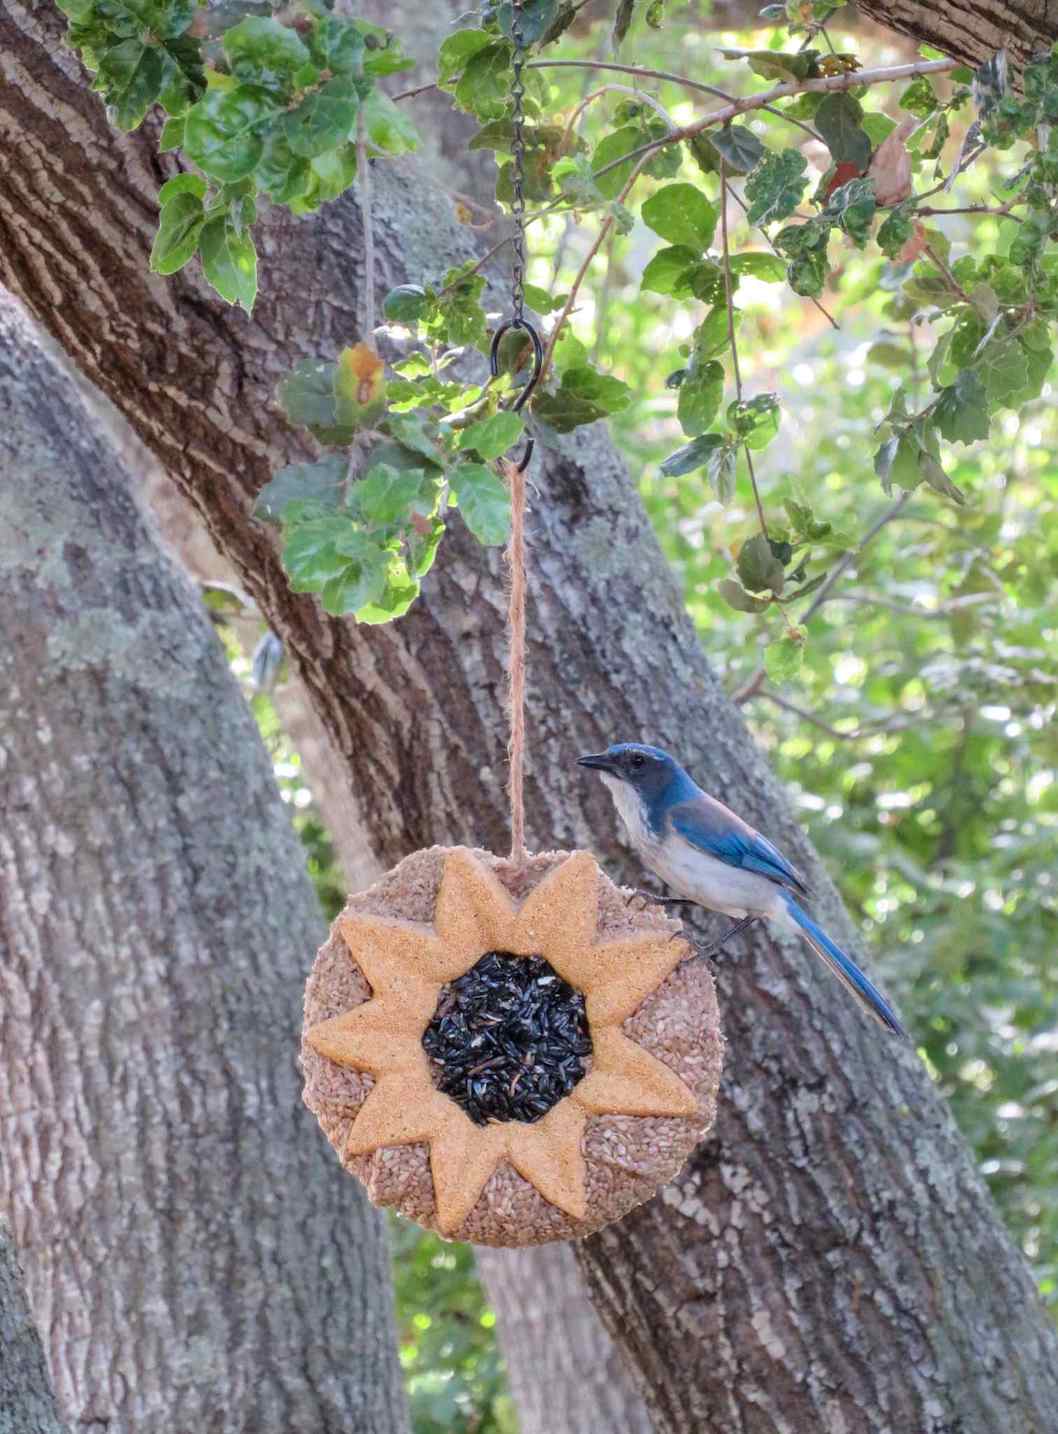 A scrub jay is perched on a sunflower suet feeder hanging by heavy duty twine from an oak tree. The round suet has been eaten down a bit to have some chunks taken out of it.